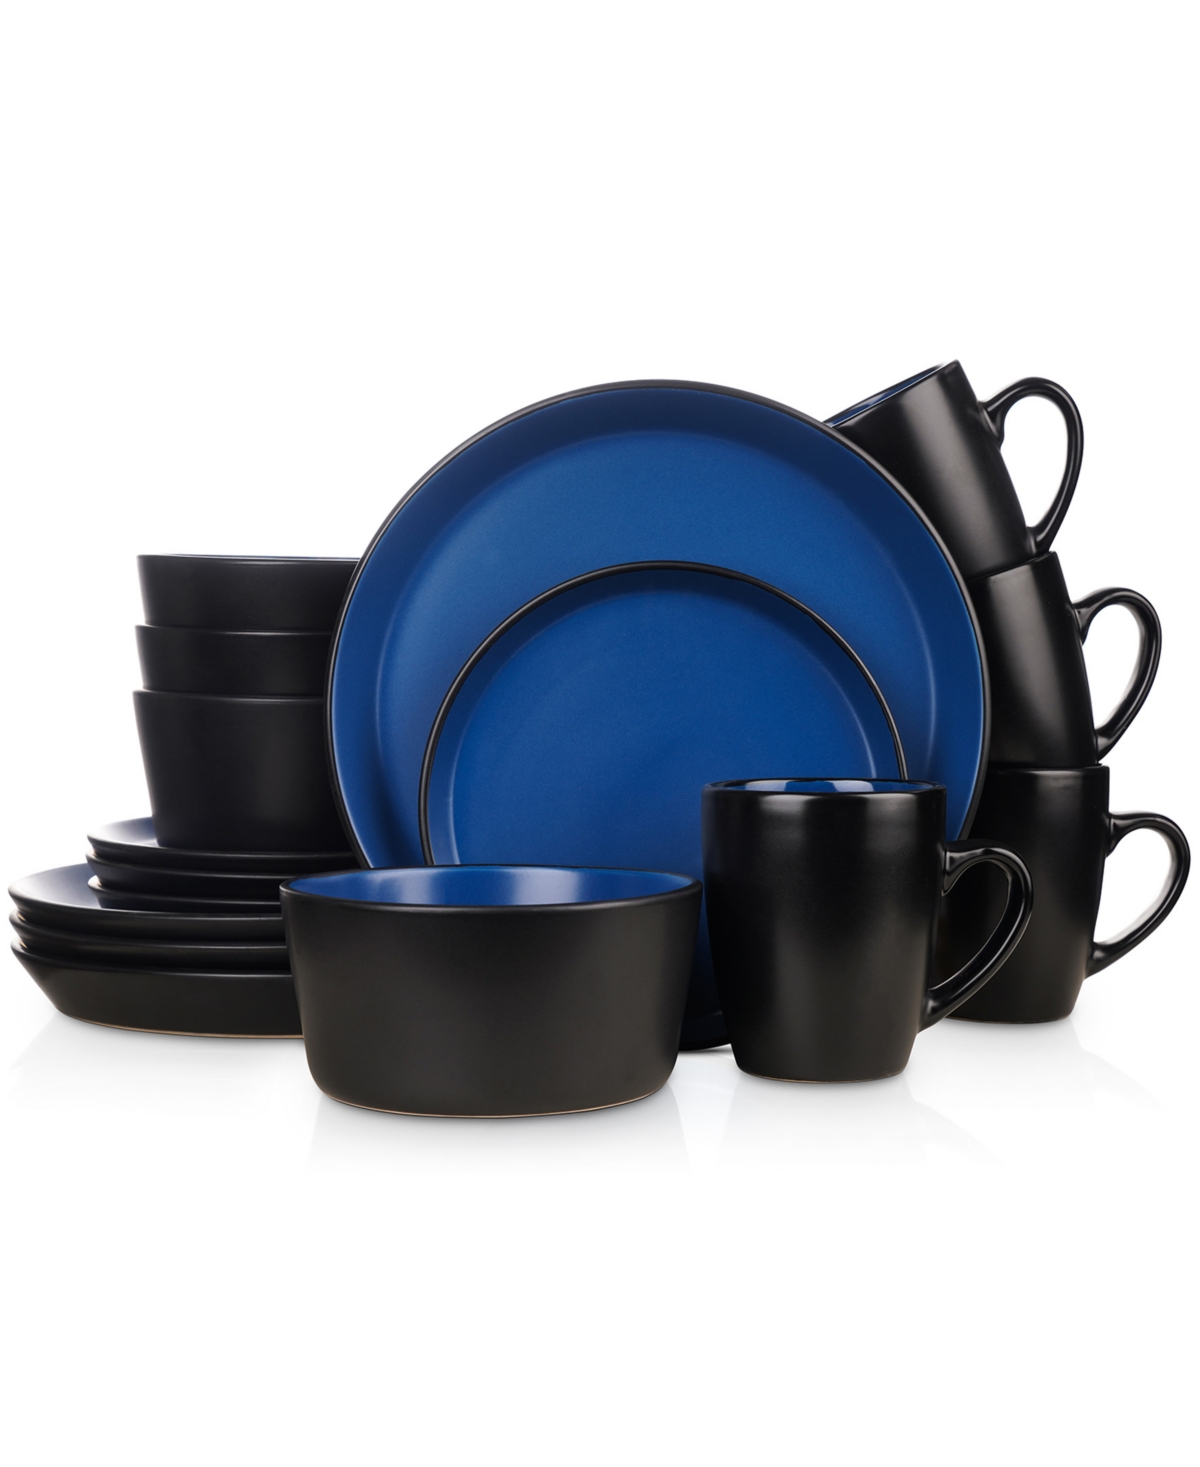 Albie 16 Pieces Dinnerware Set, Service For 4 - Blue and Black